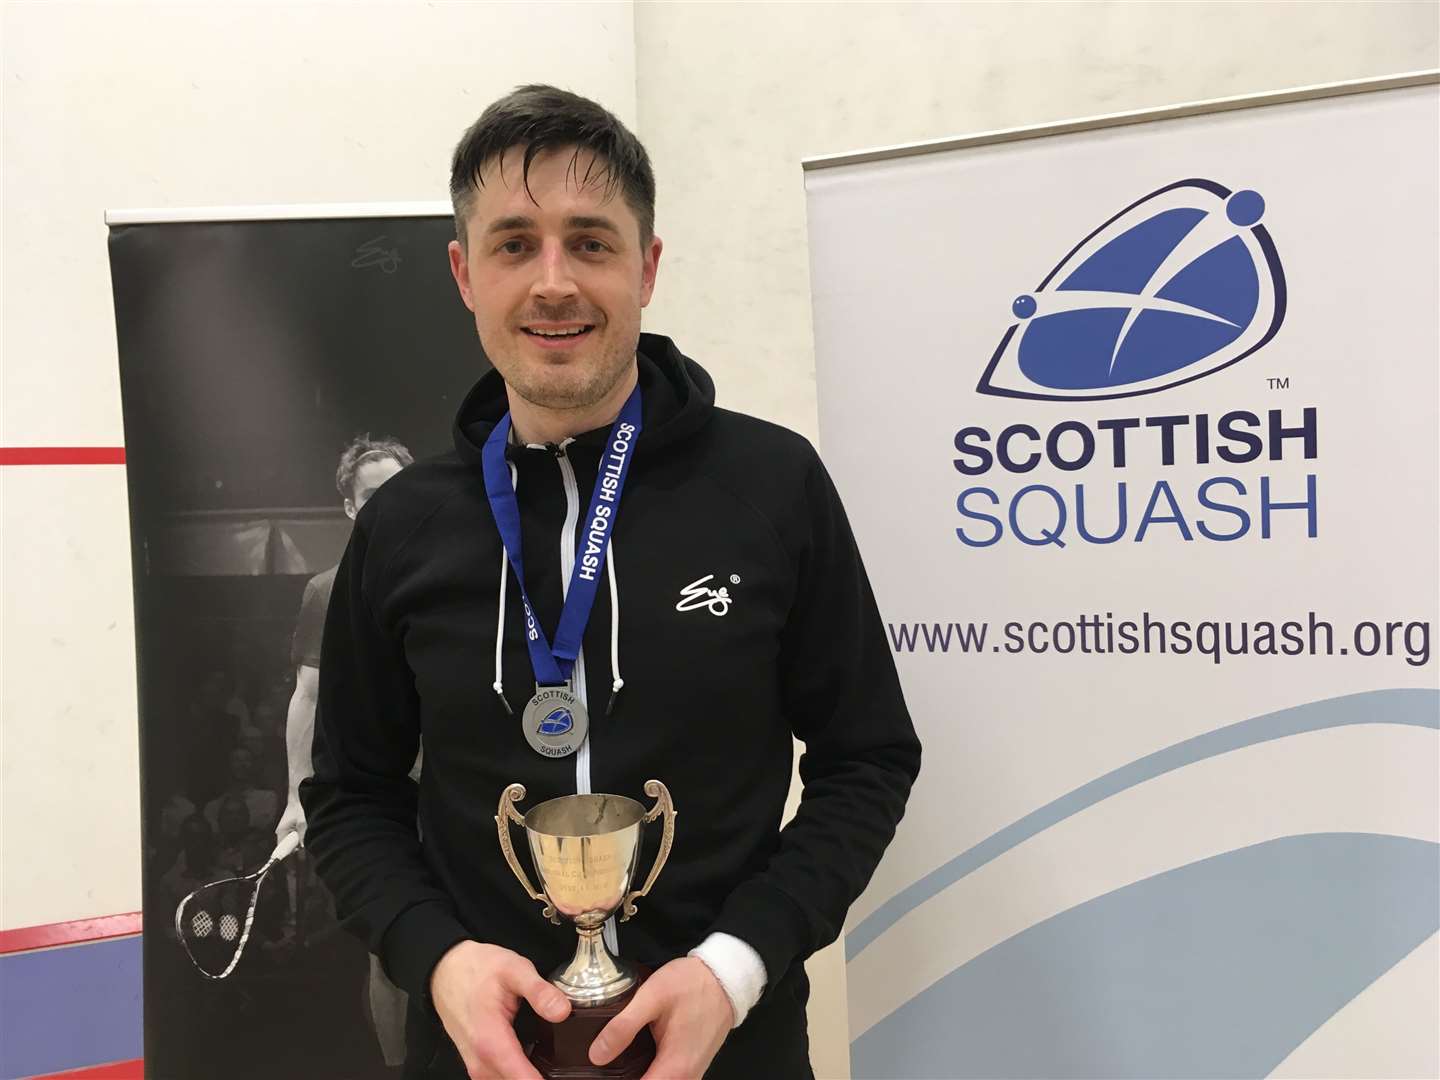 Andrew MacBean won two gold medals at the Scottish Masters National Championships.